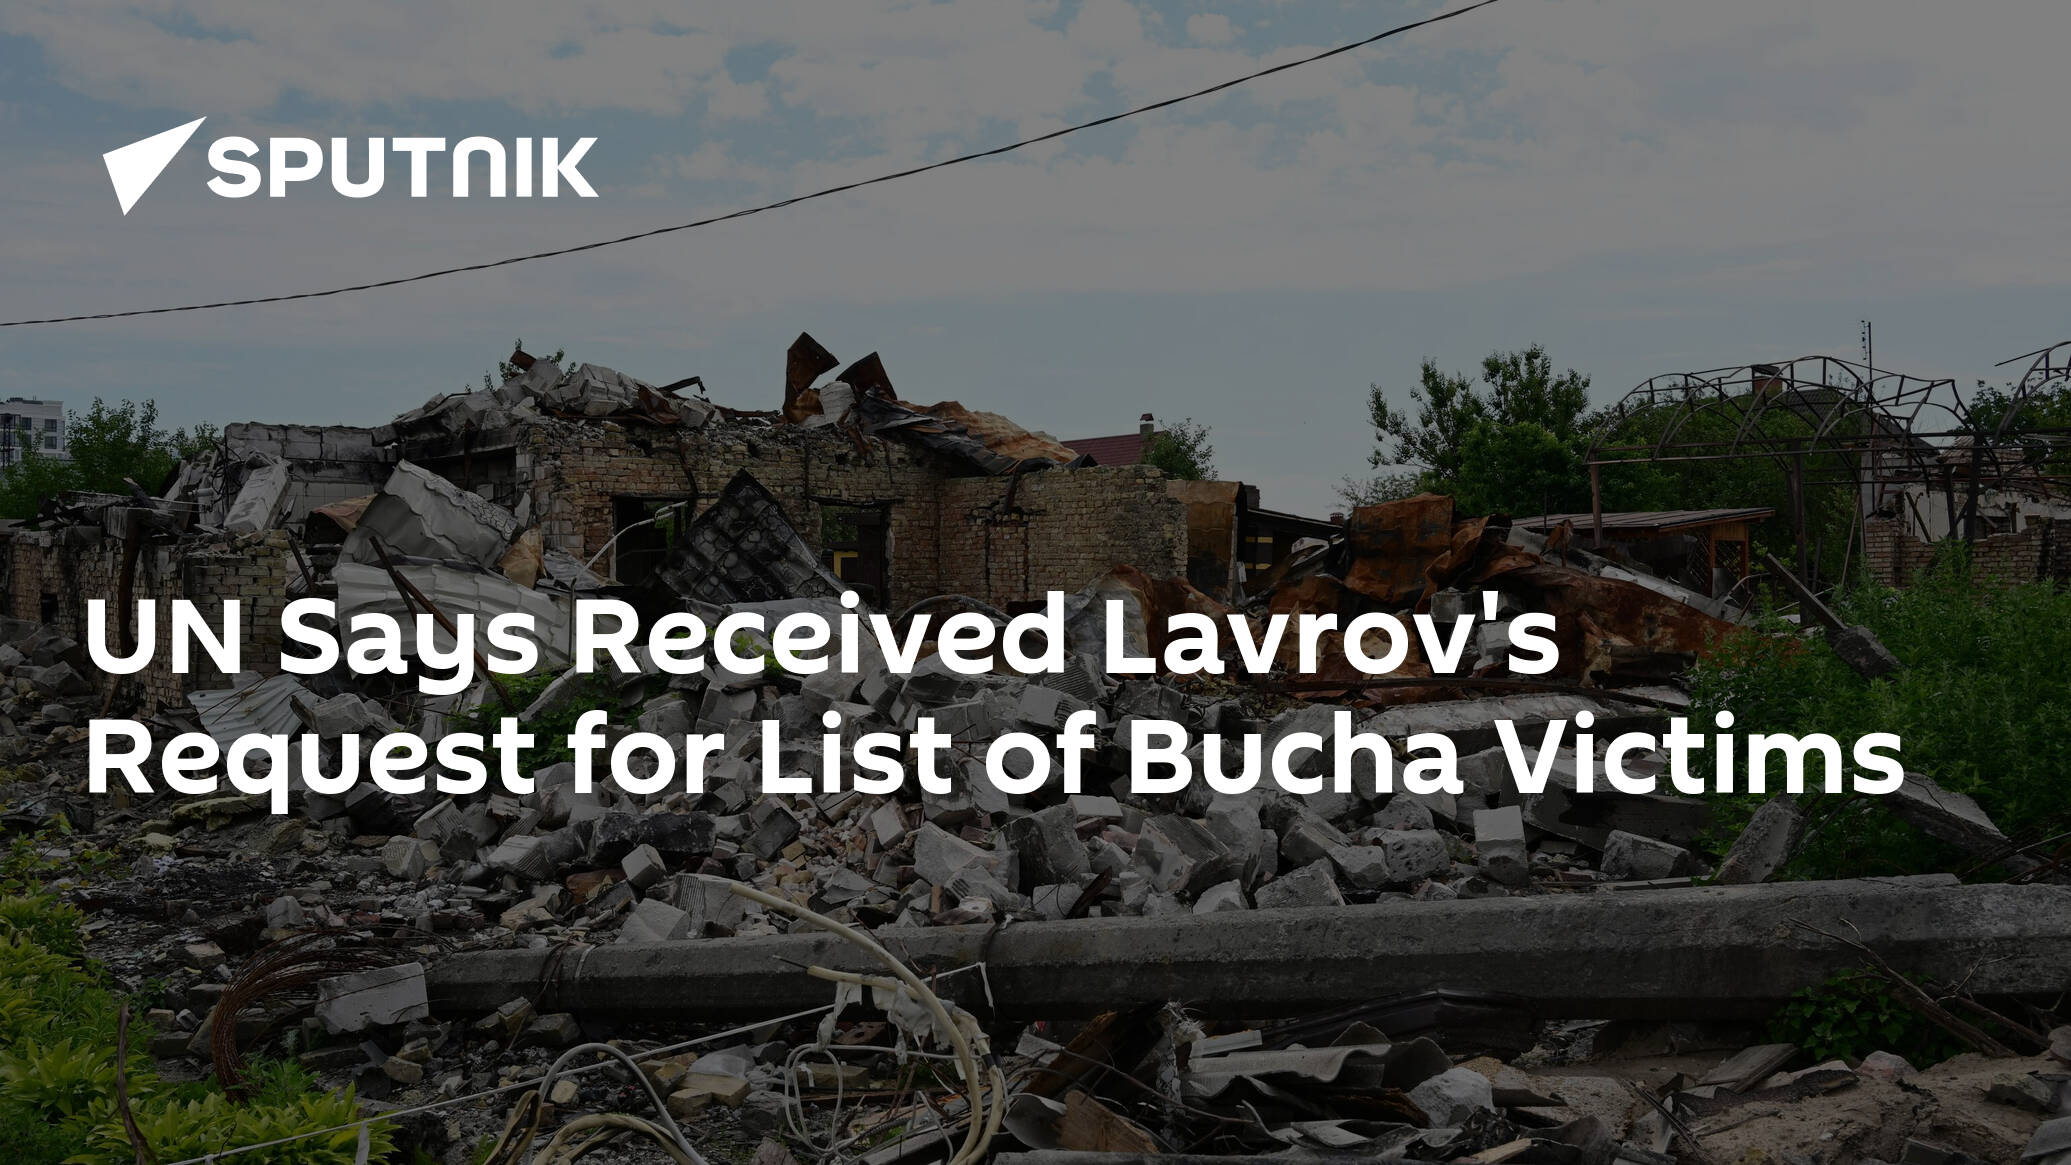 UN Says Received Lavrov's Request for List of Bucha Victims